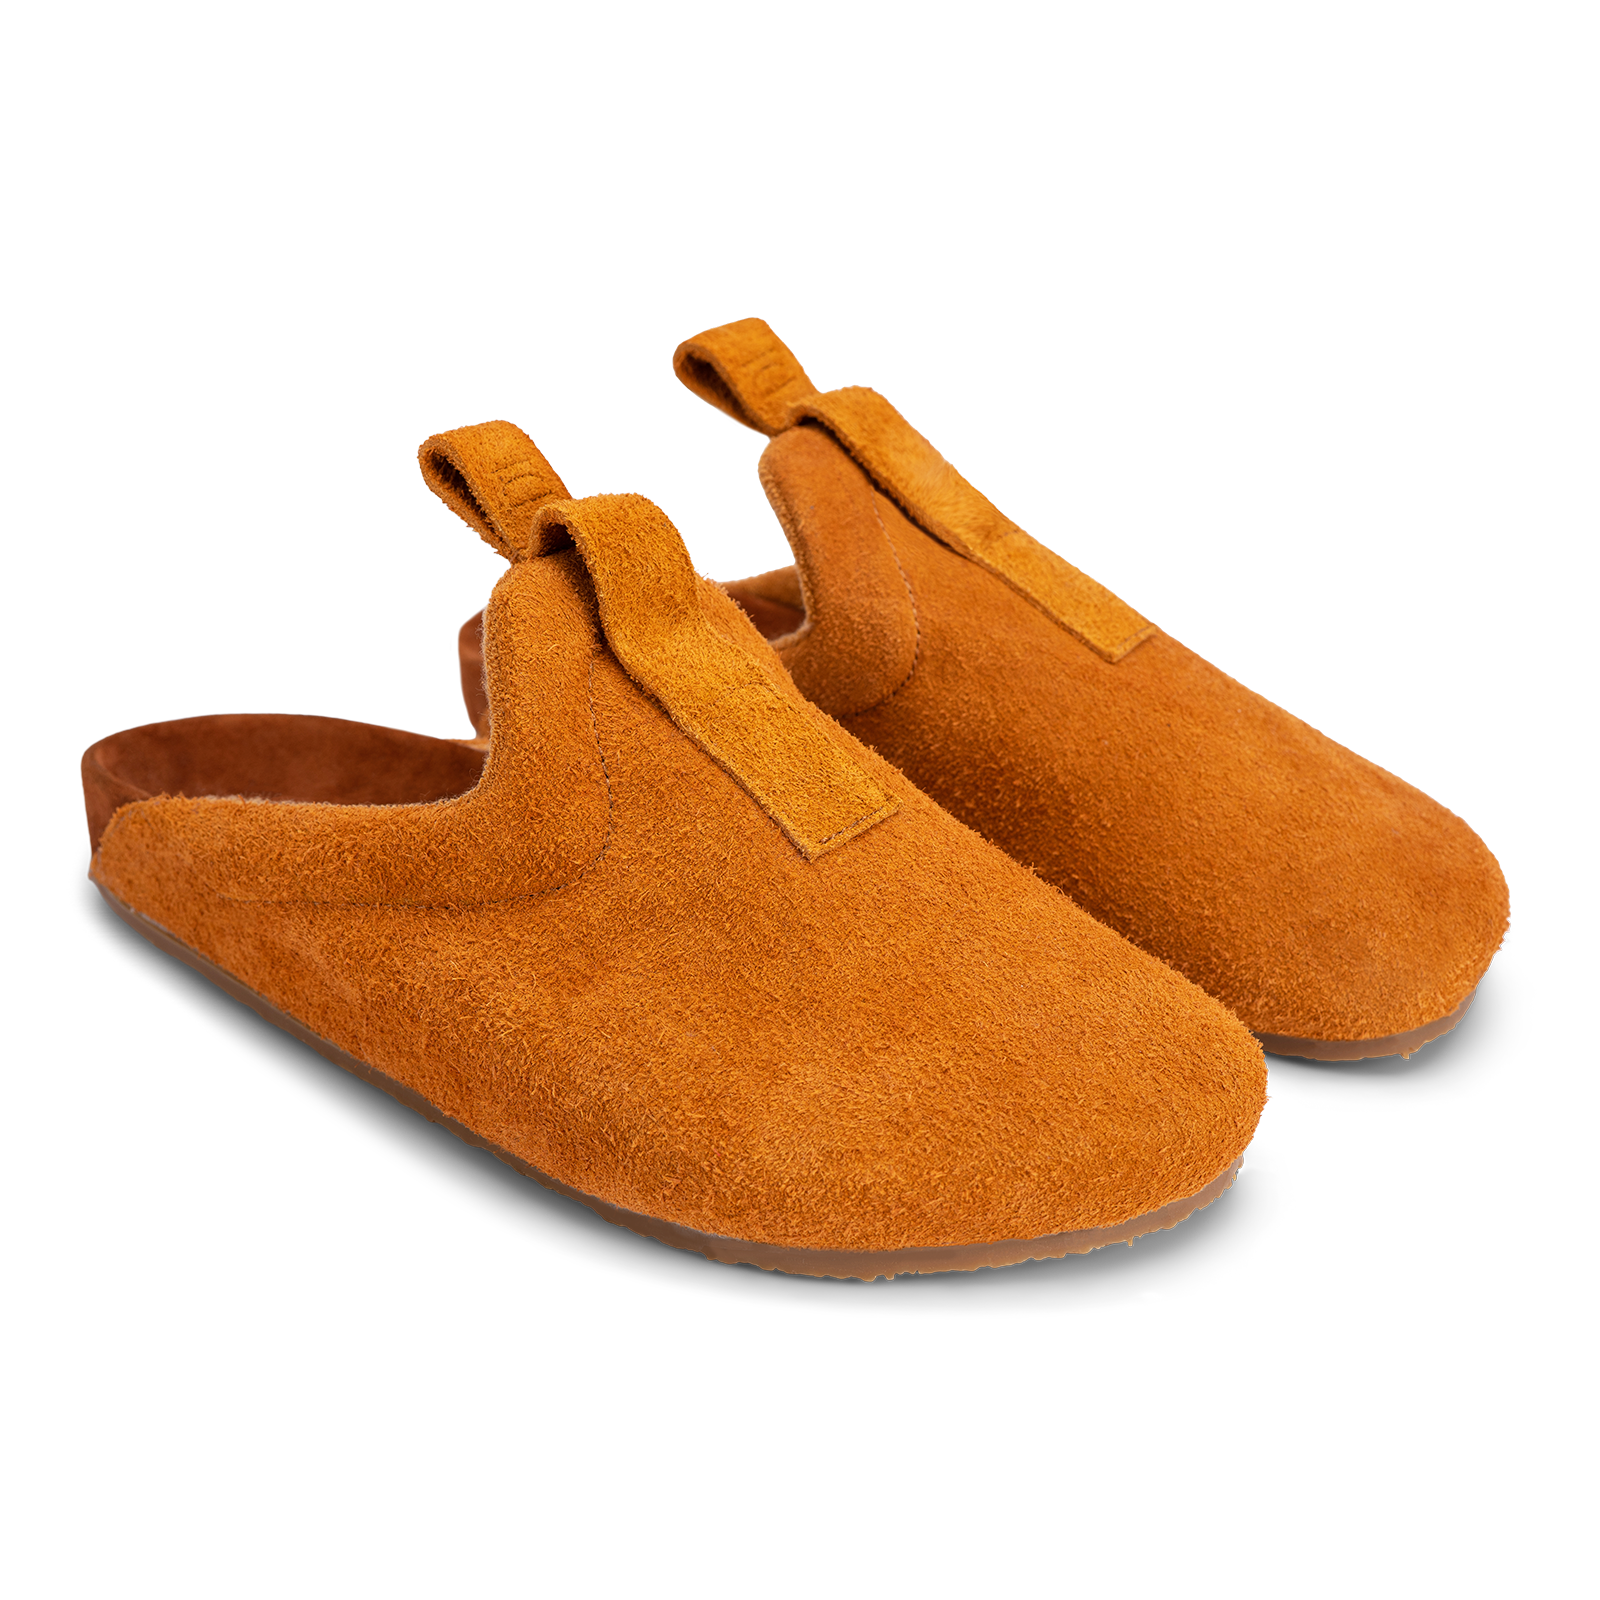 top 3/4 view Brownish Orange suede upper, cork midsole wrapped in soft suede, Vibram sheet gum rubber outsole